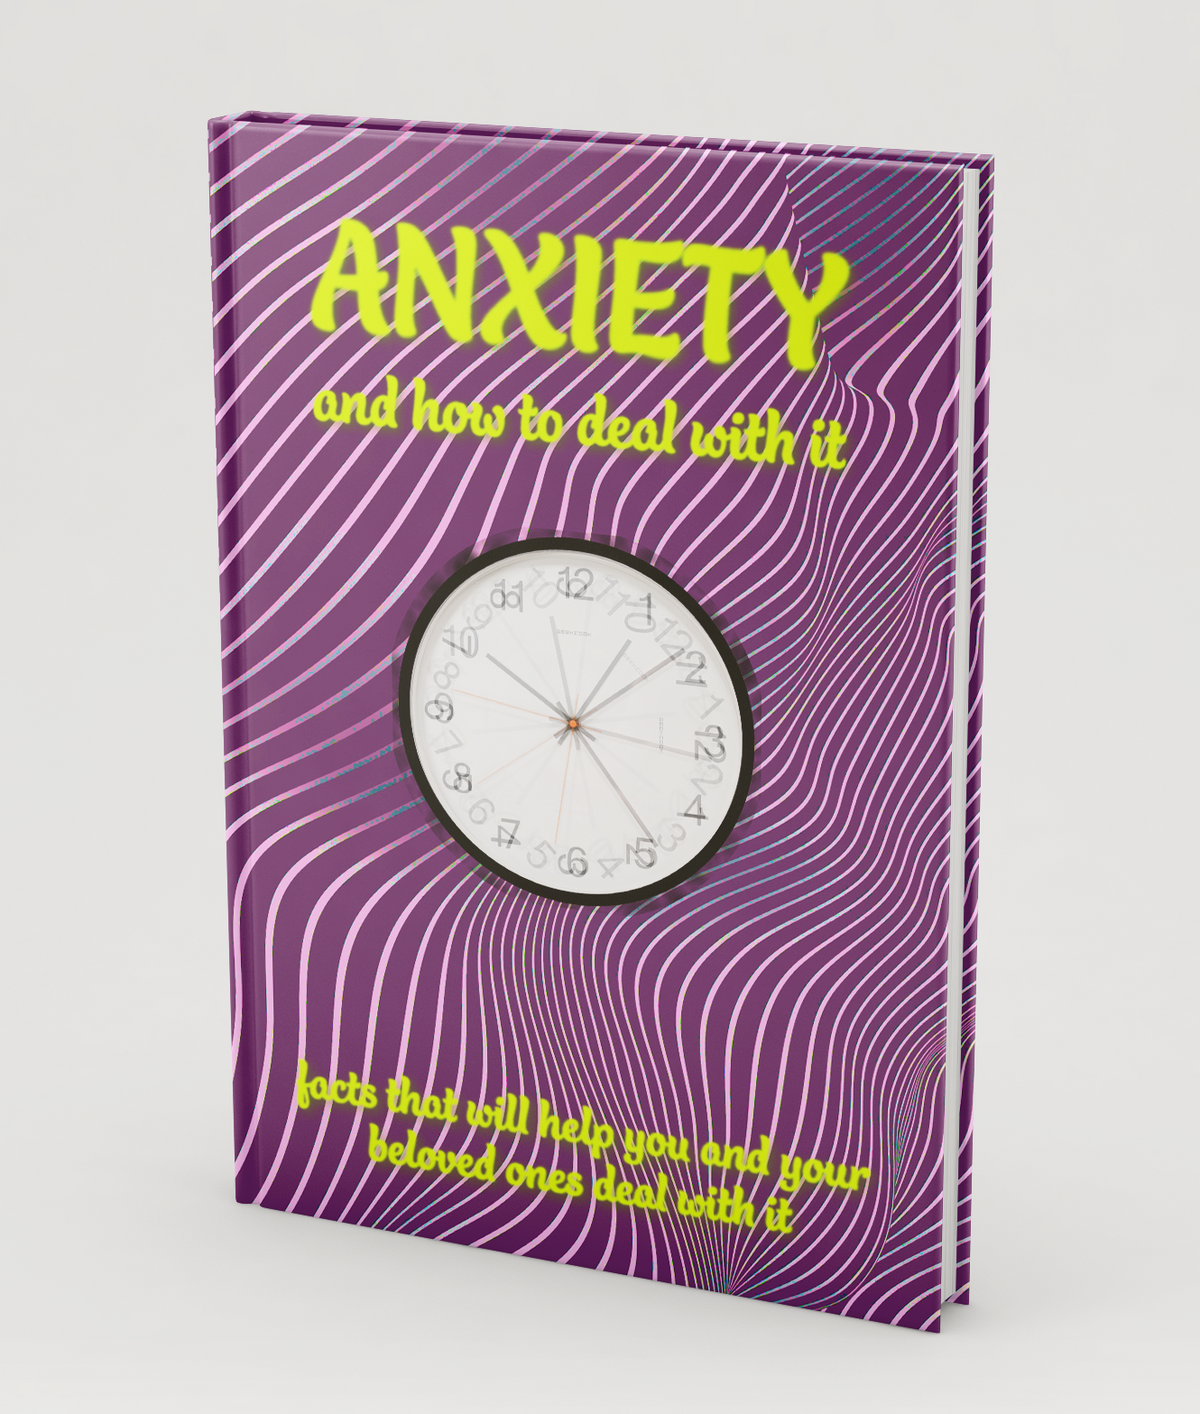 Anxiety and how to deal with it